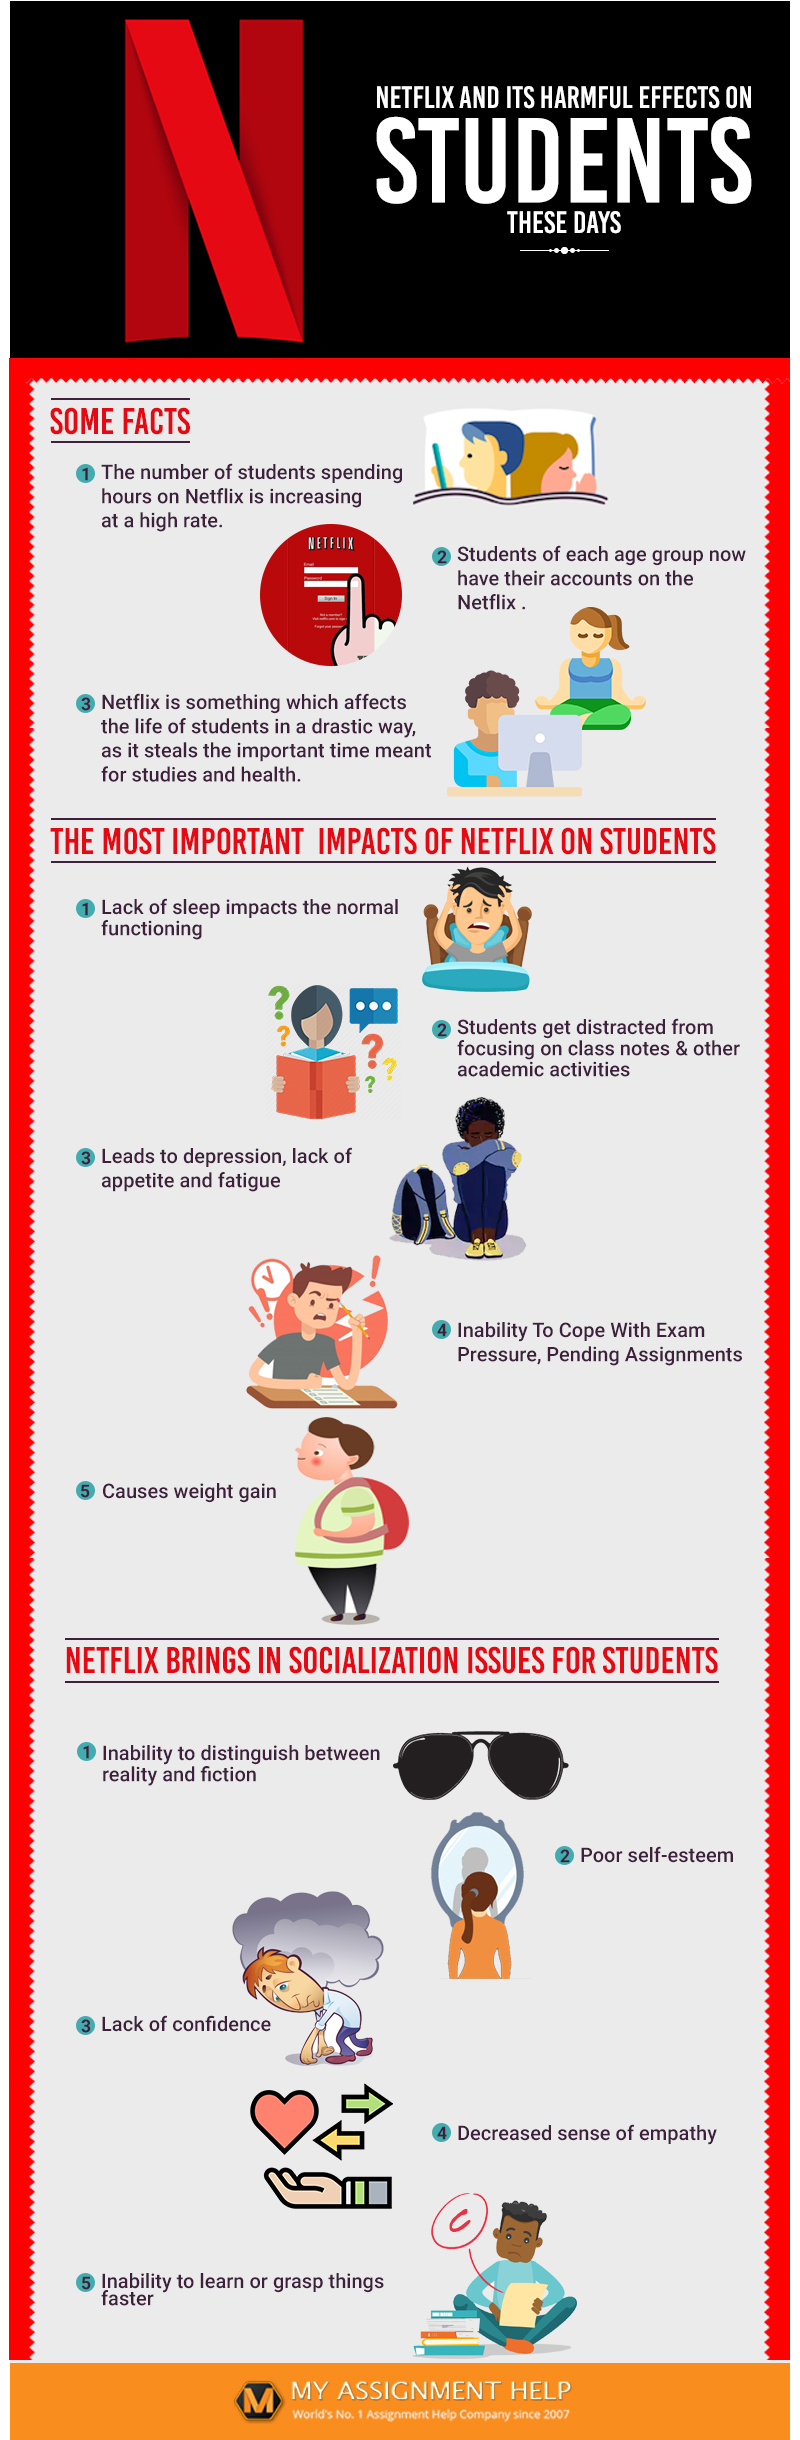 Netflix-and-Its-Harmful-Effects-On-Students-These-Days